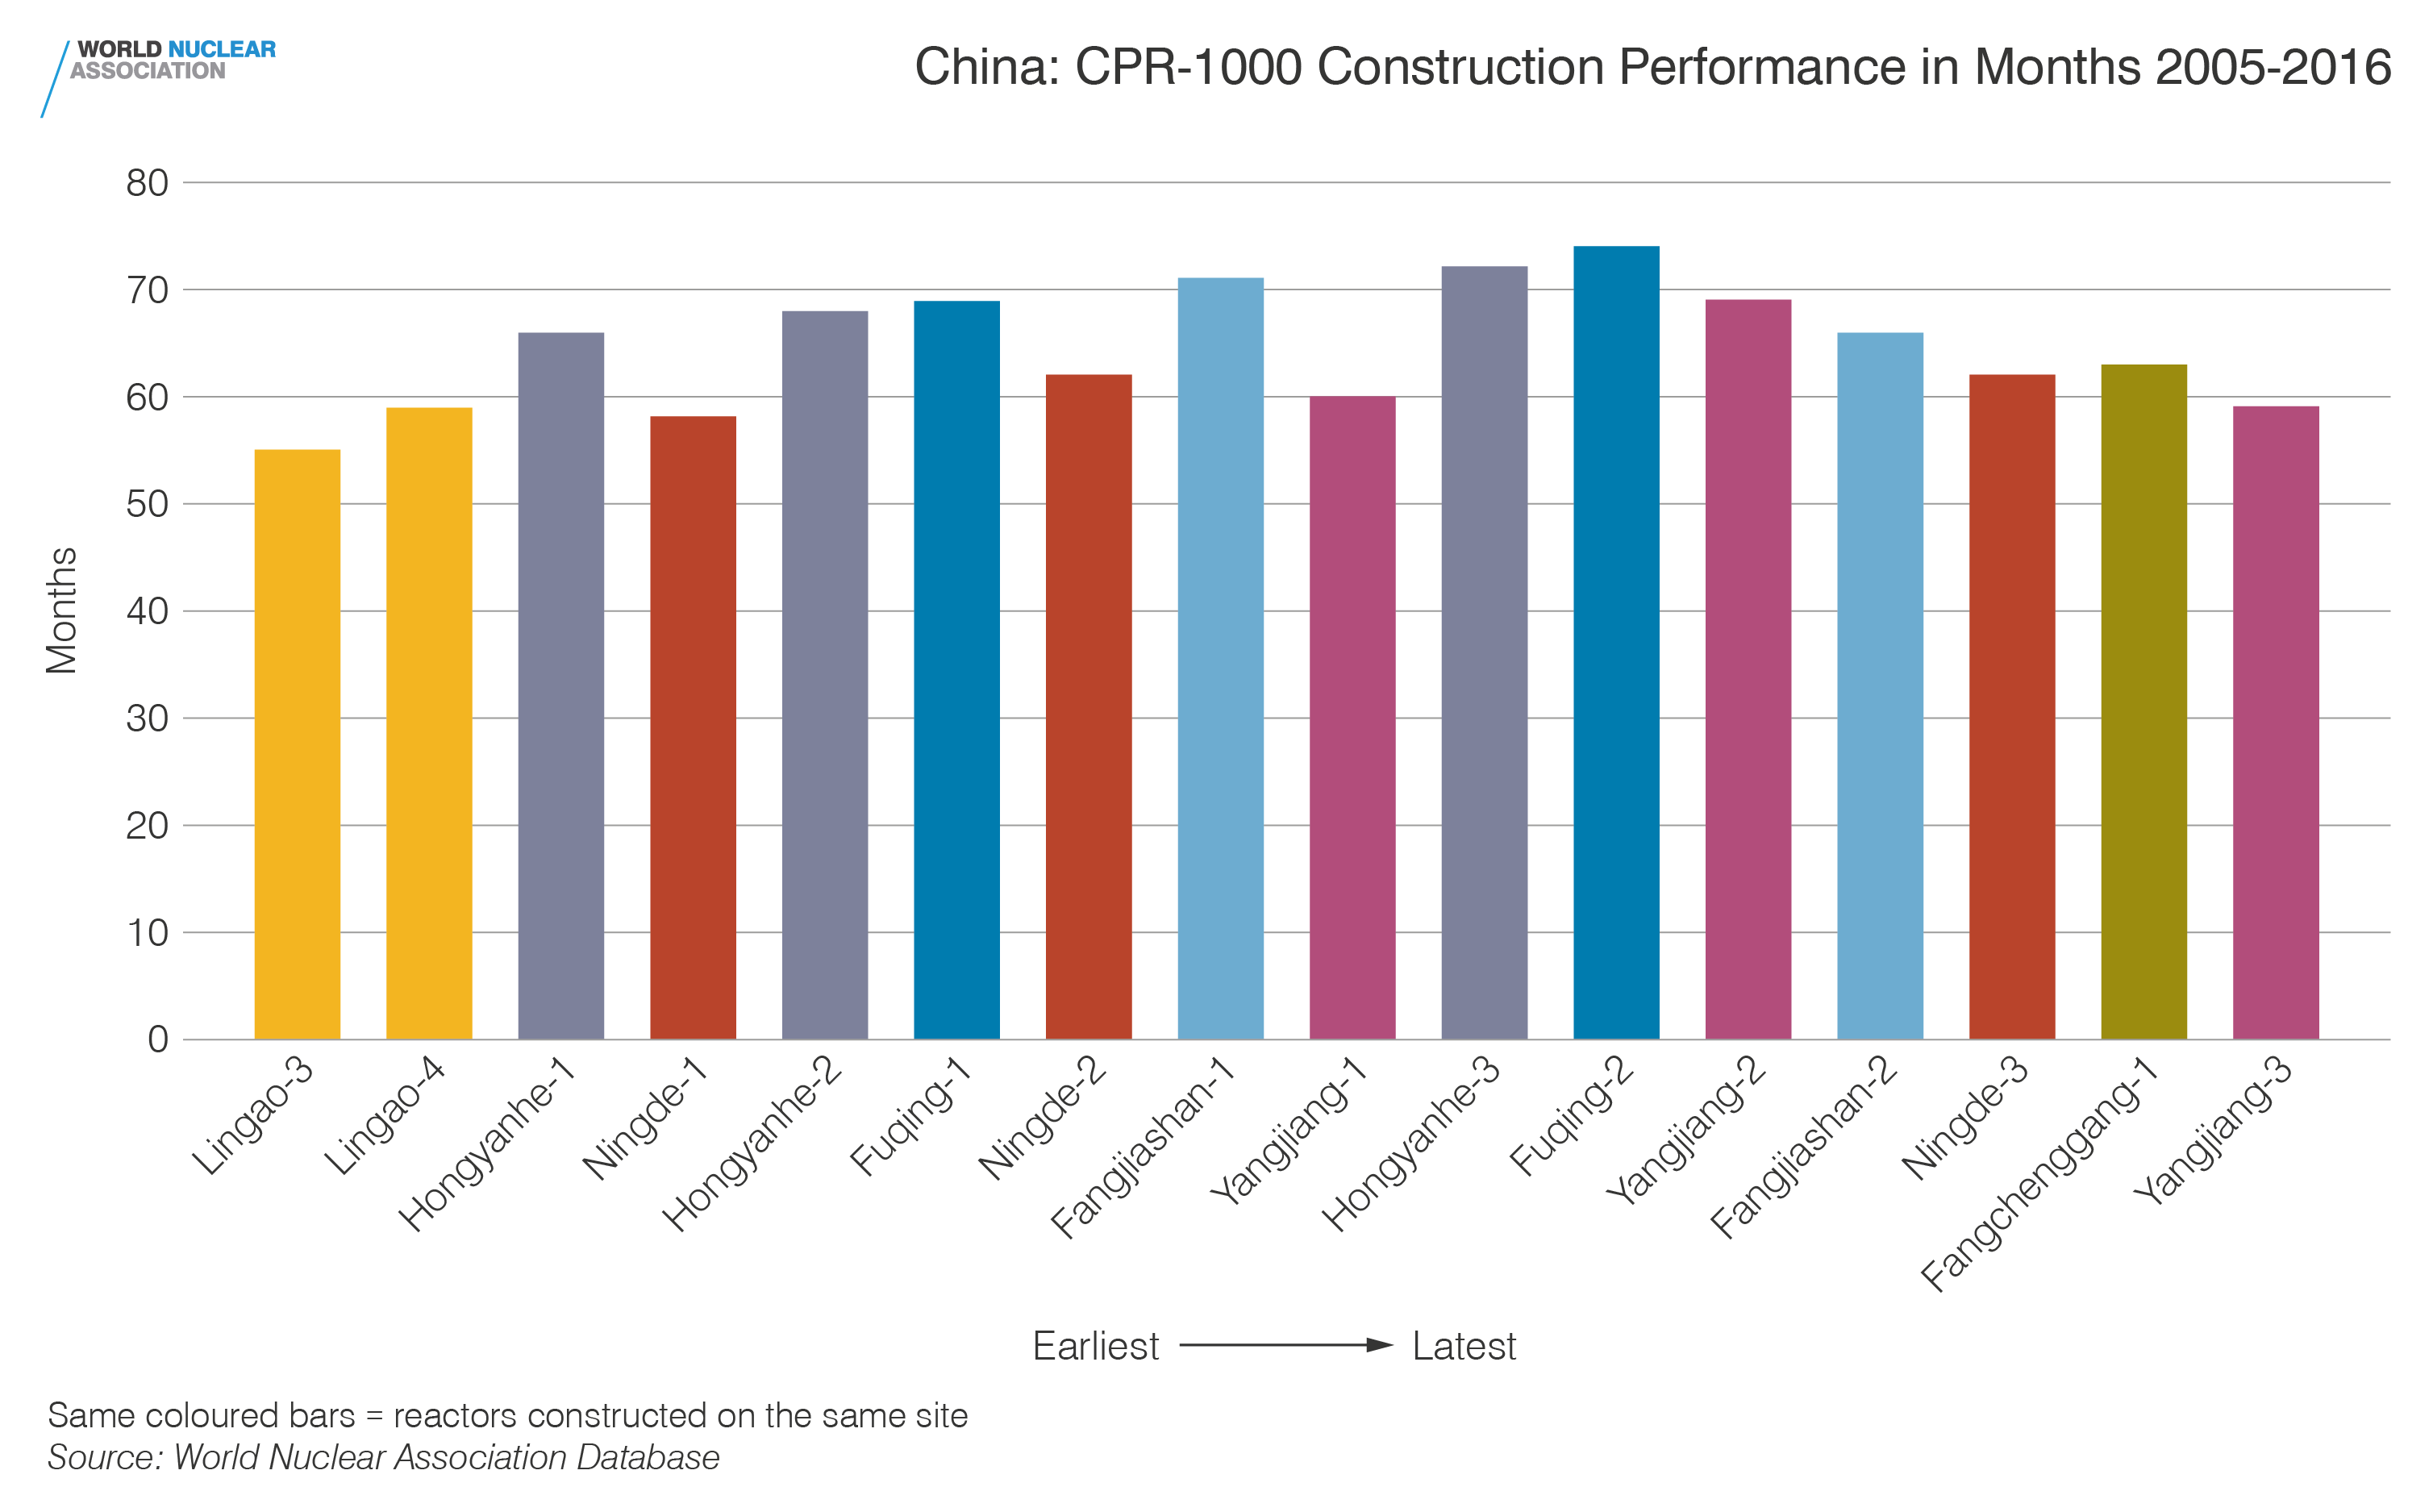 China: CPR-1000 construction performance in months 2005-2016